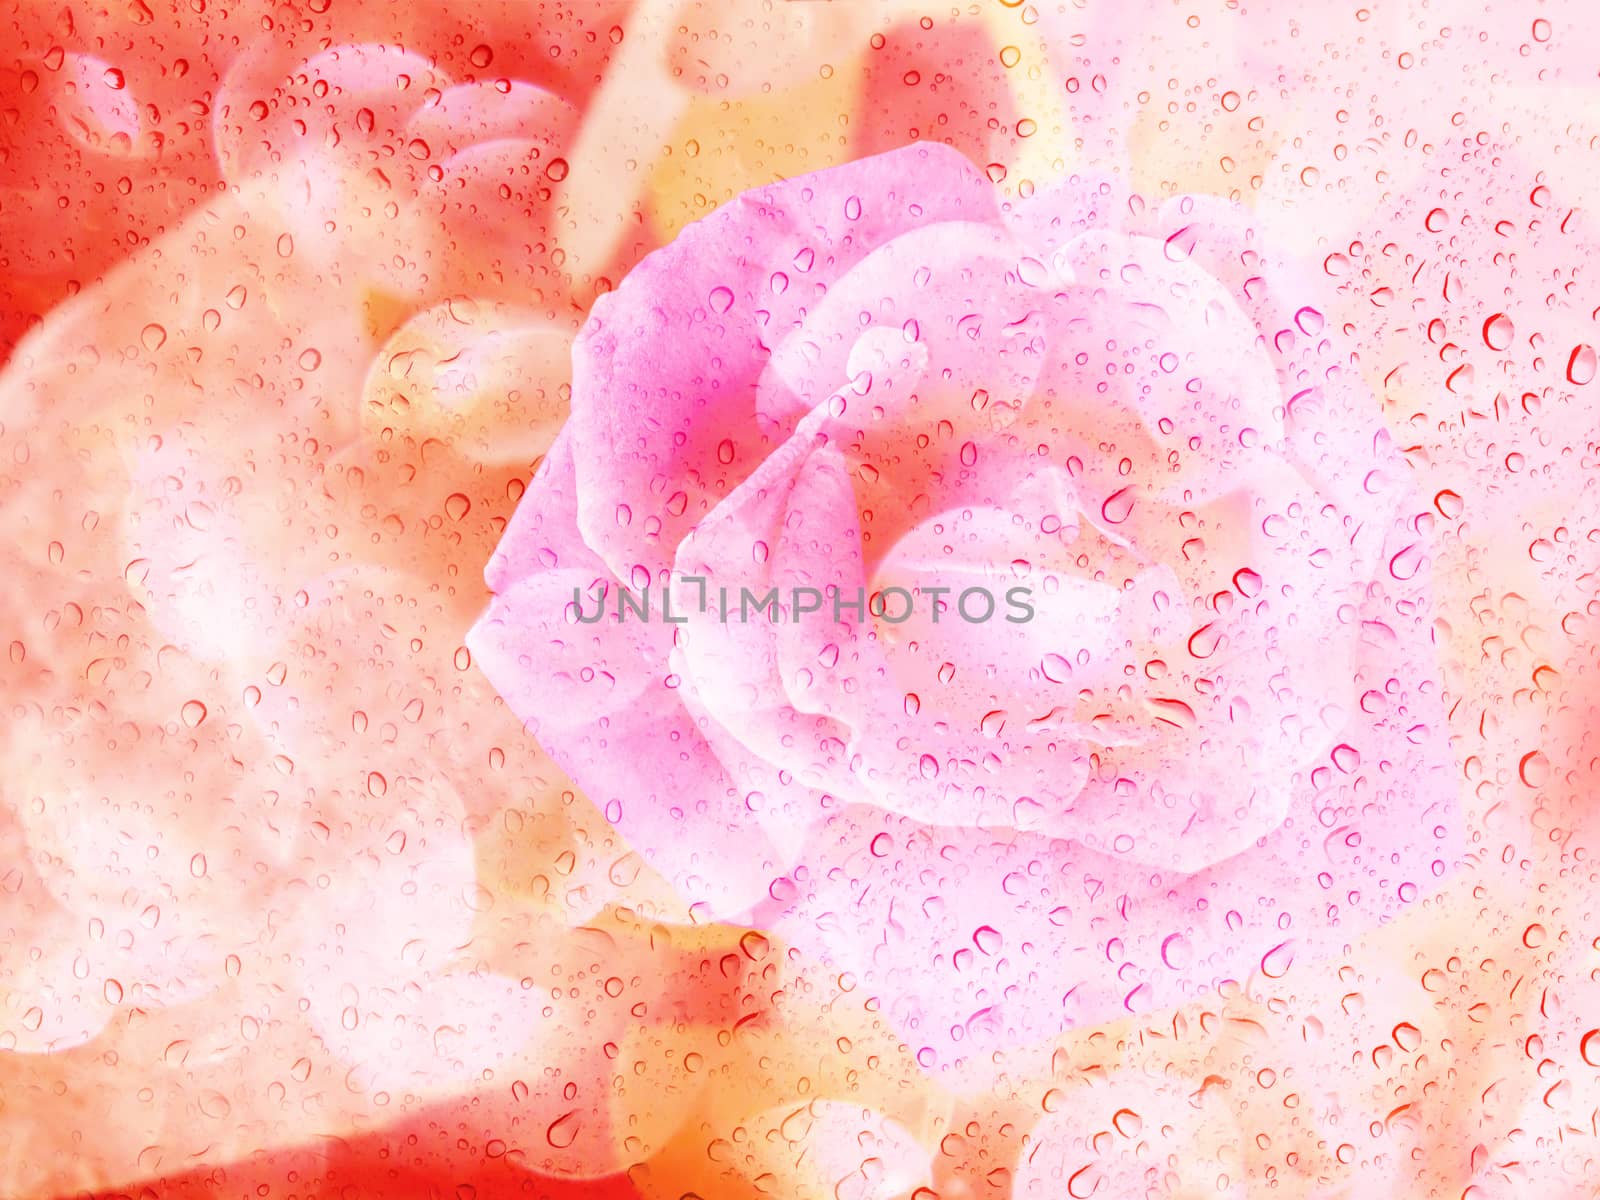 Romantic rose shadow with water drop on glass mirror plate for abstract valentine background